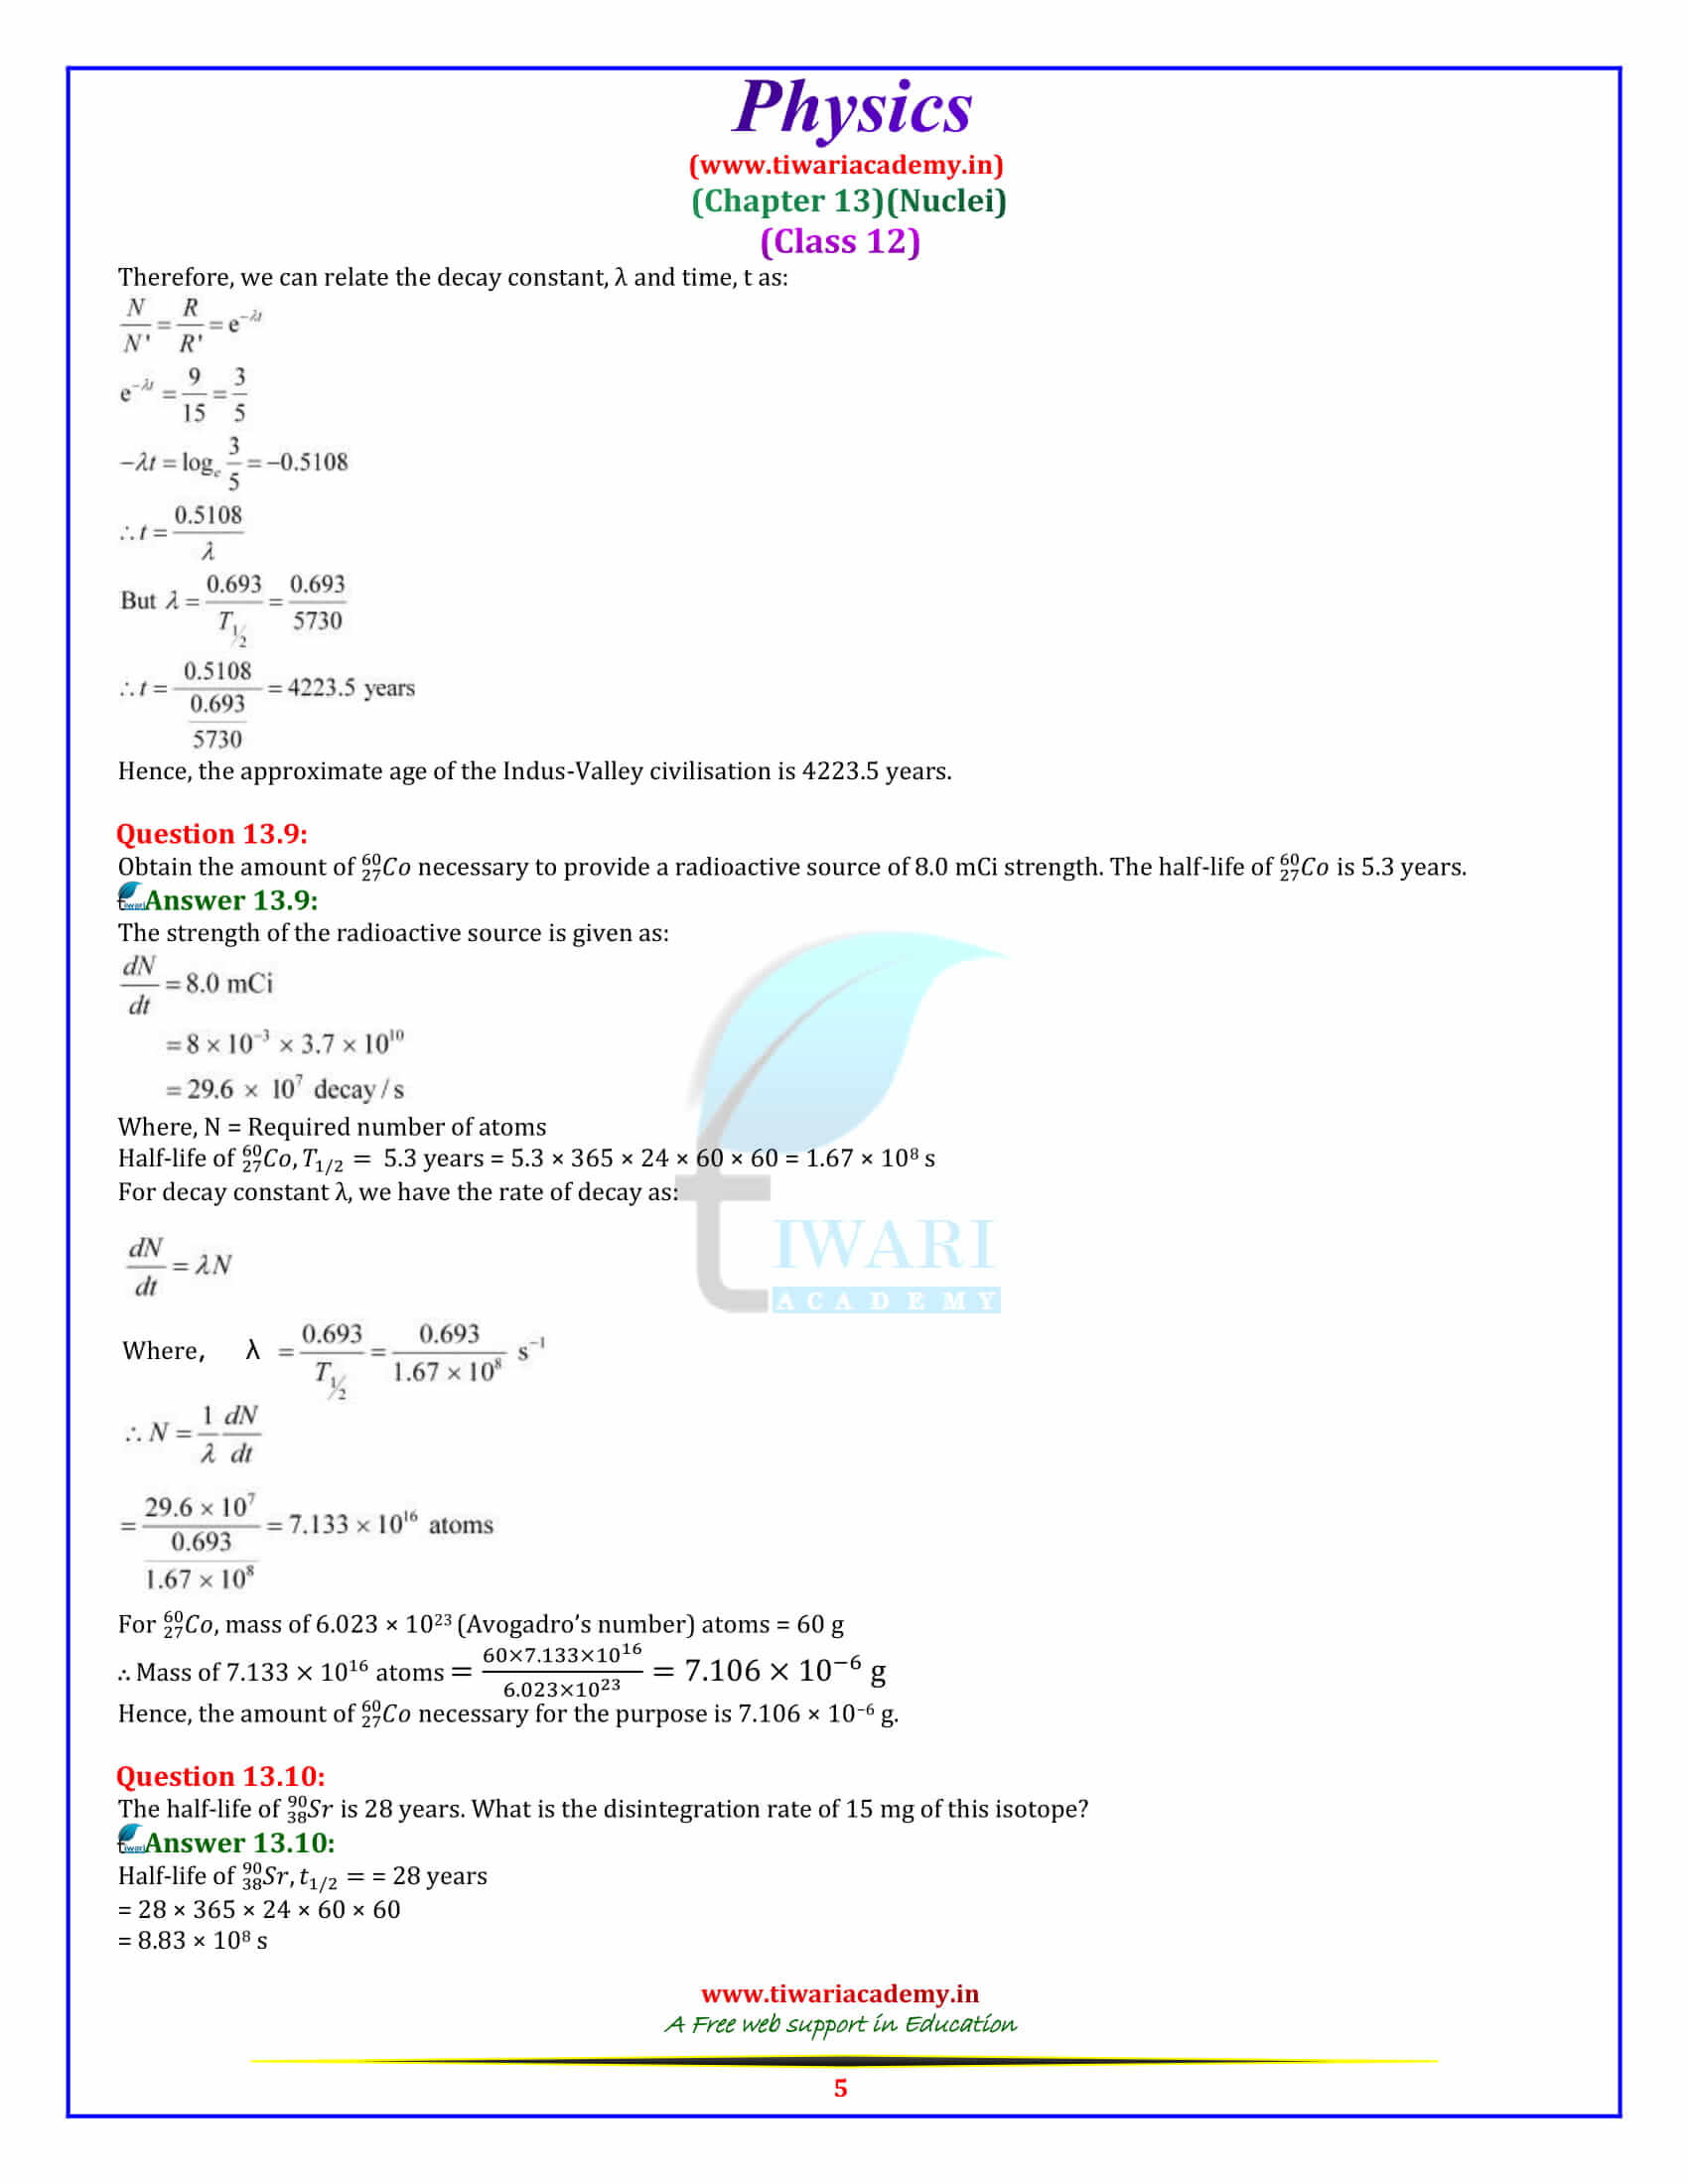 NCERT Solutions for Class 12 Physics Chapter 13 Nuclei for intermediate first year +2